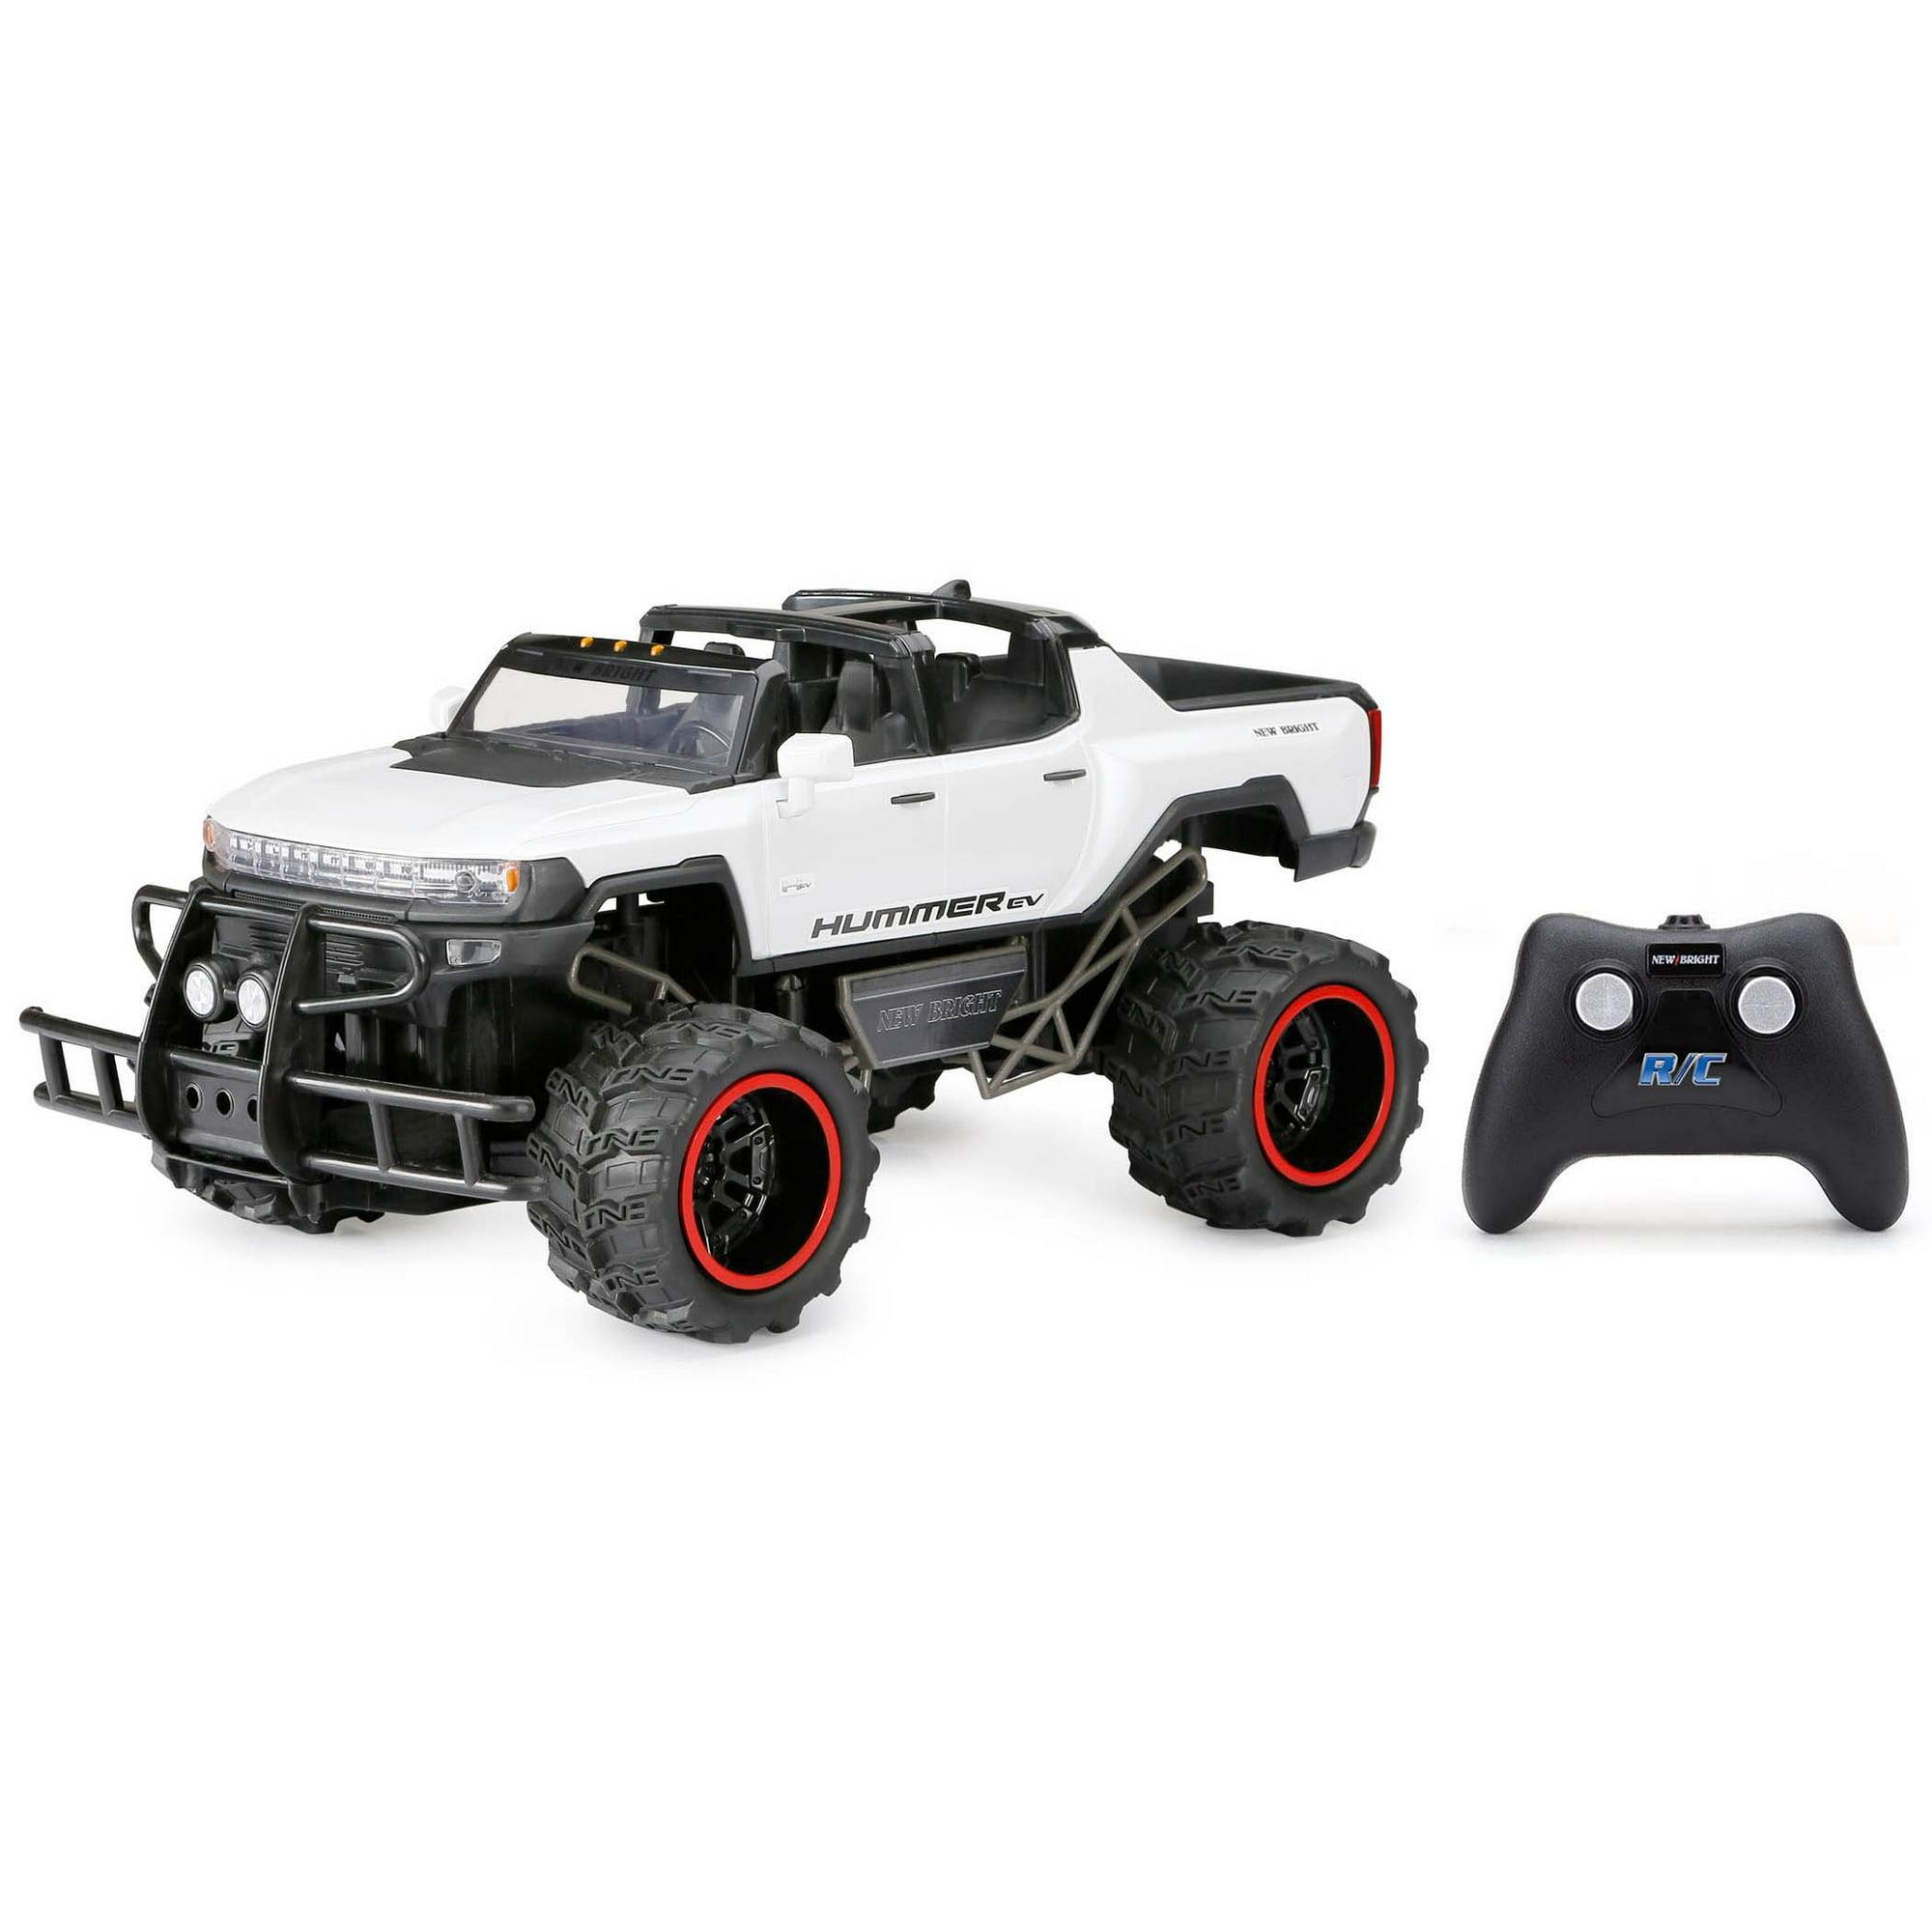 Rc Truck For Sale: Stop selling boring RC trucks